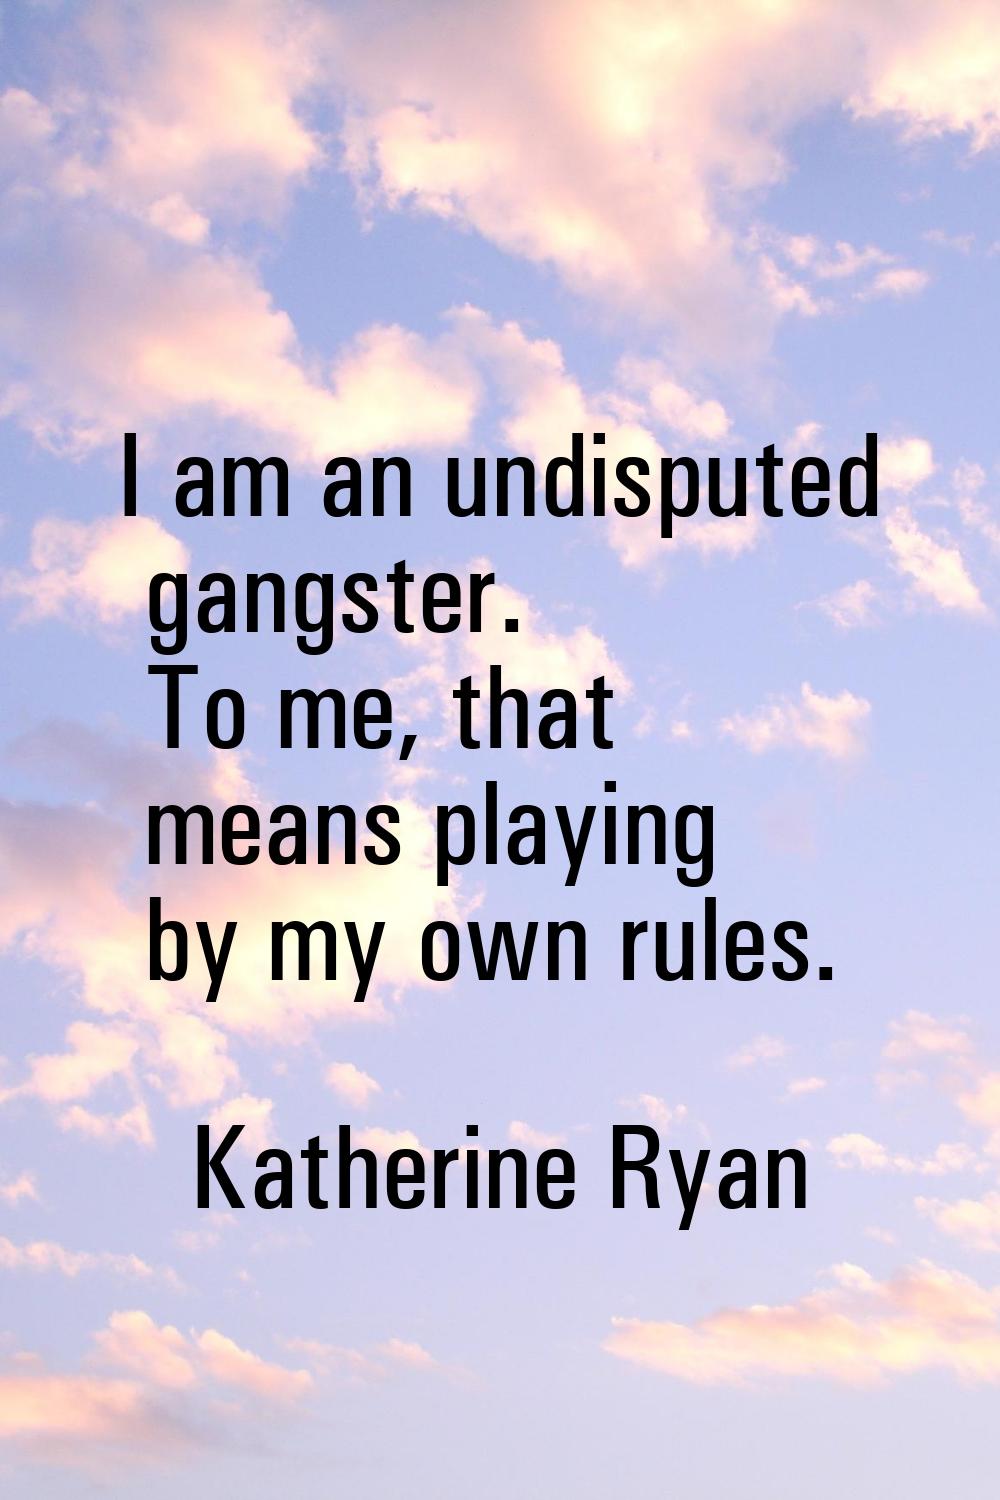 I am an undisputed gangster. To me, that means playing by my own rules.